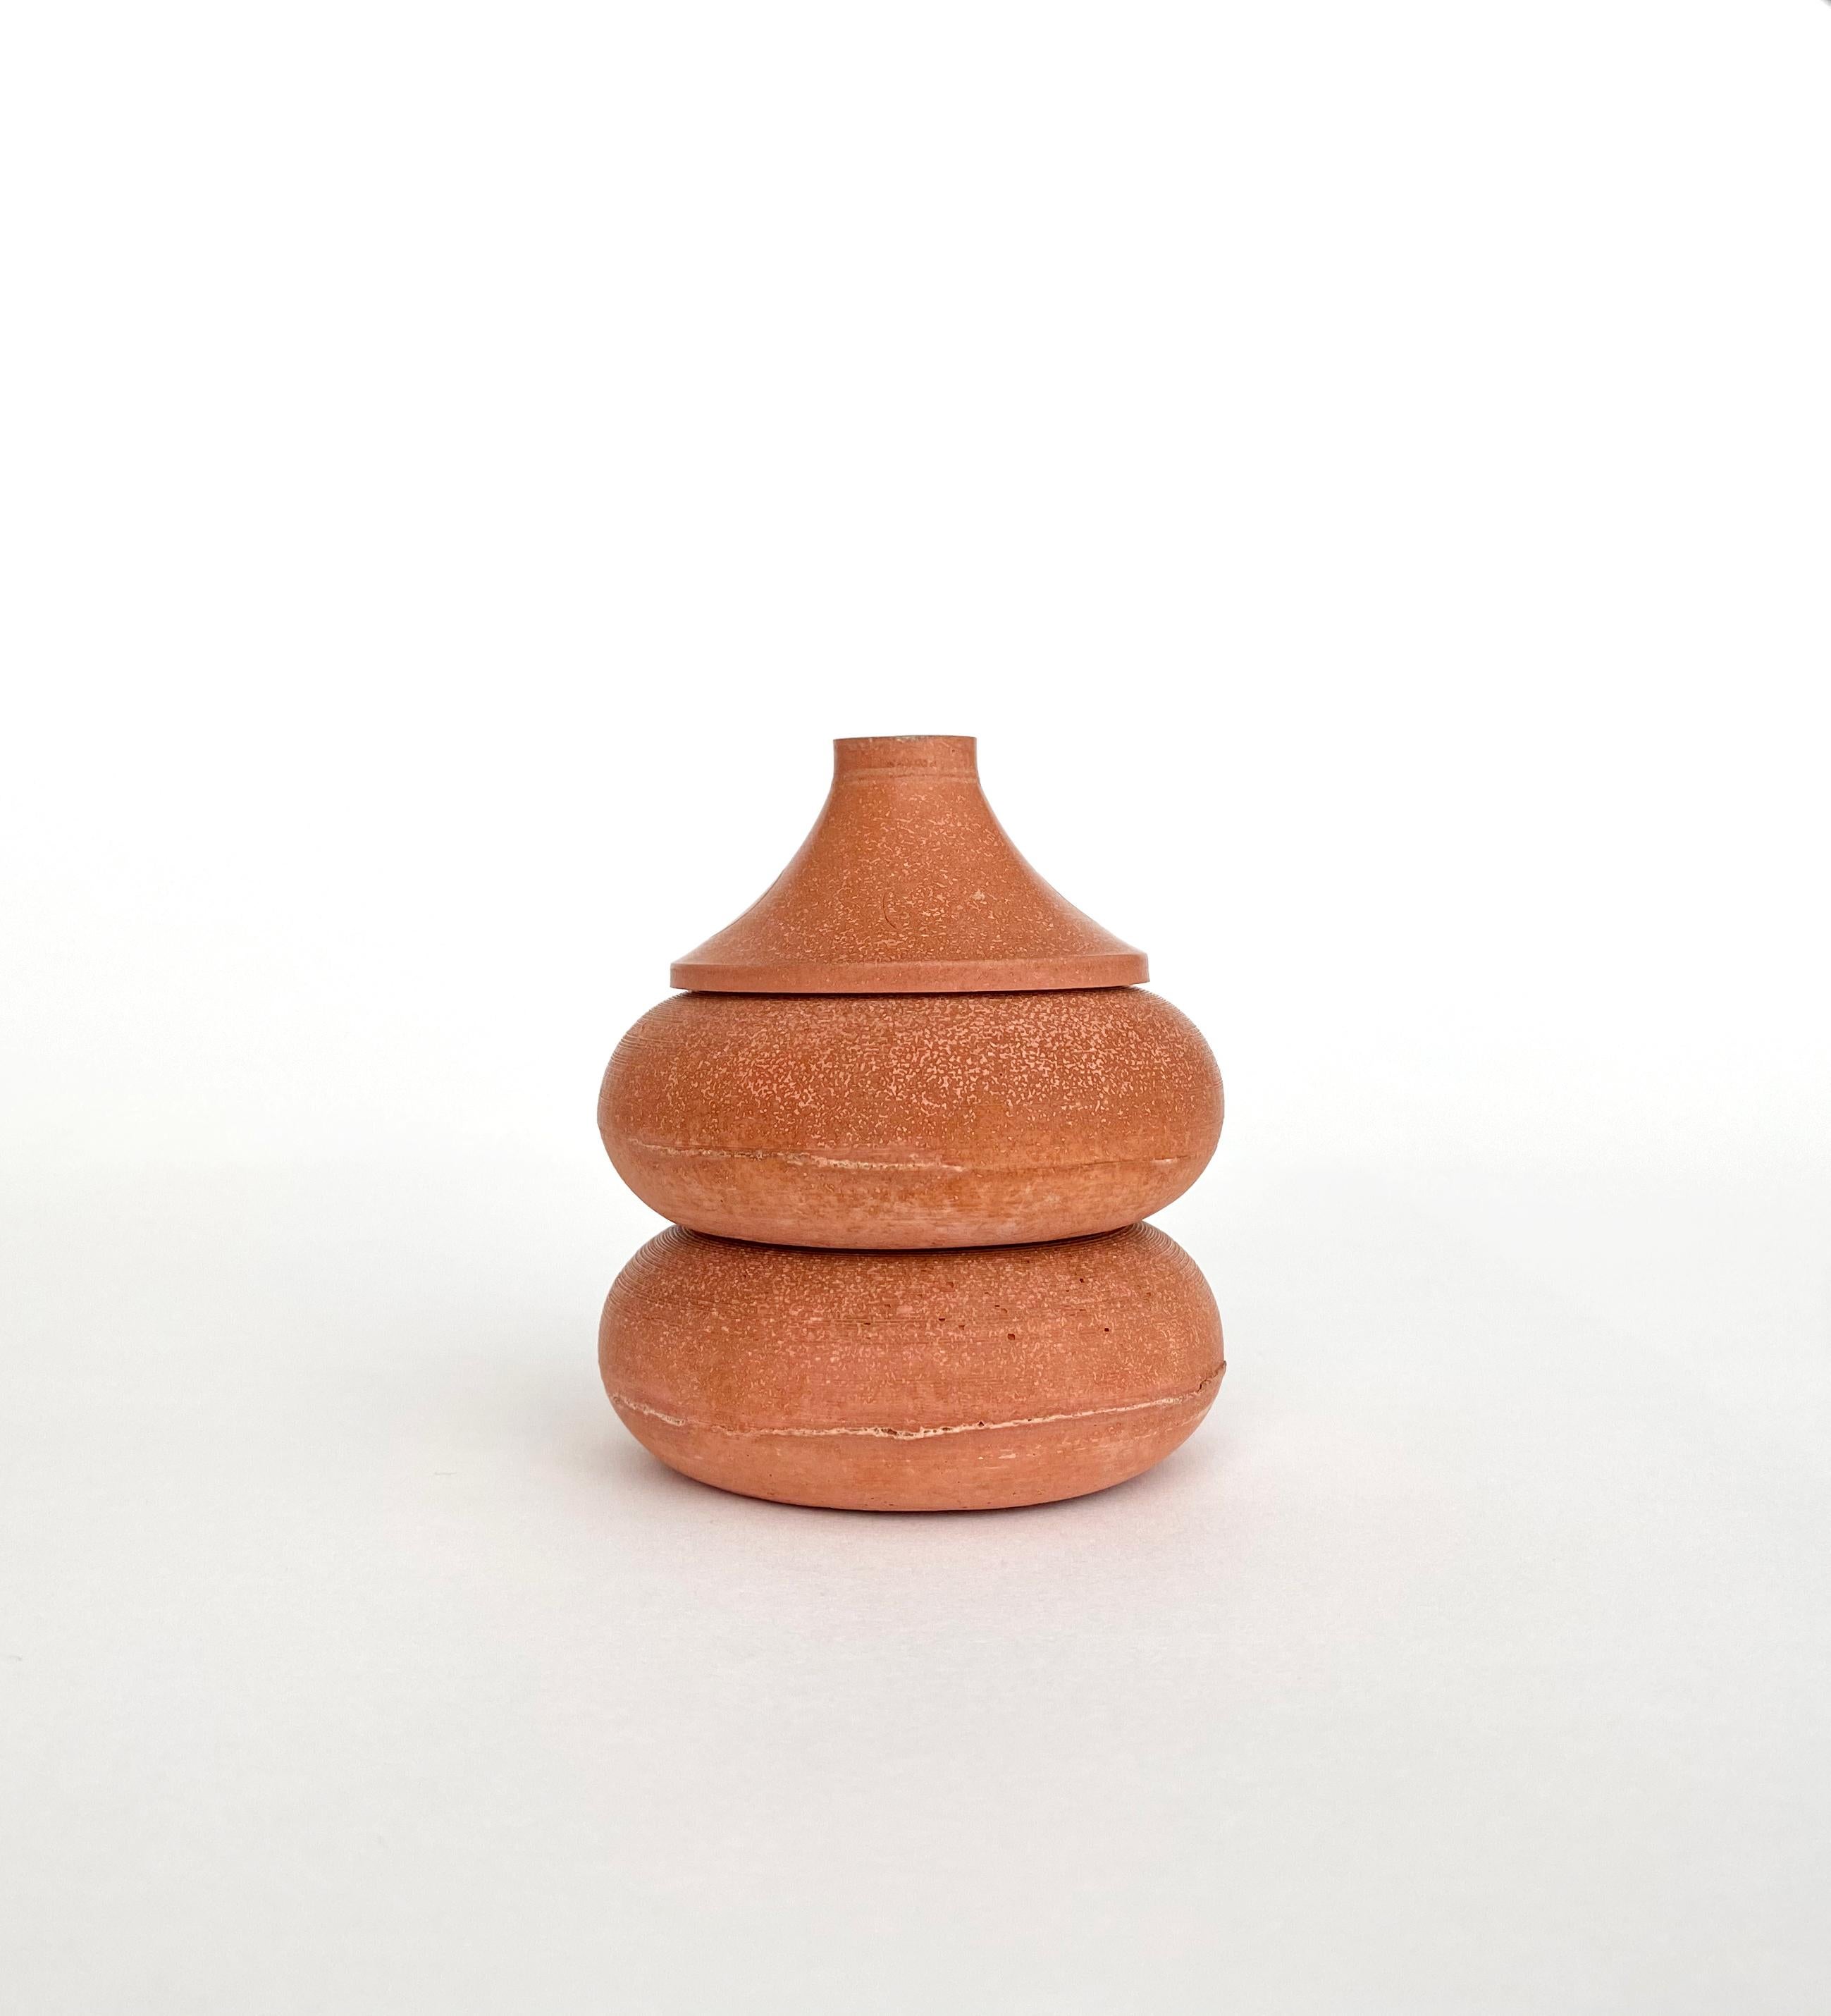 Nomad jar pebble tower by Gilles & Cecilie.
Unique.
Dimensions: H 8 x W 6 cm.
Material: terracotta with iron.

Gilles and Cecilie studio created the Nomad Jar Family to explore drawing in three dimensions. The series of objects that can stand